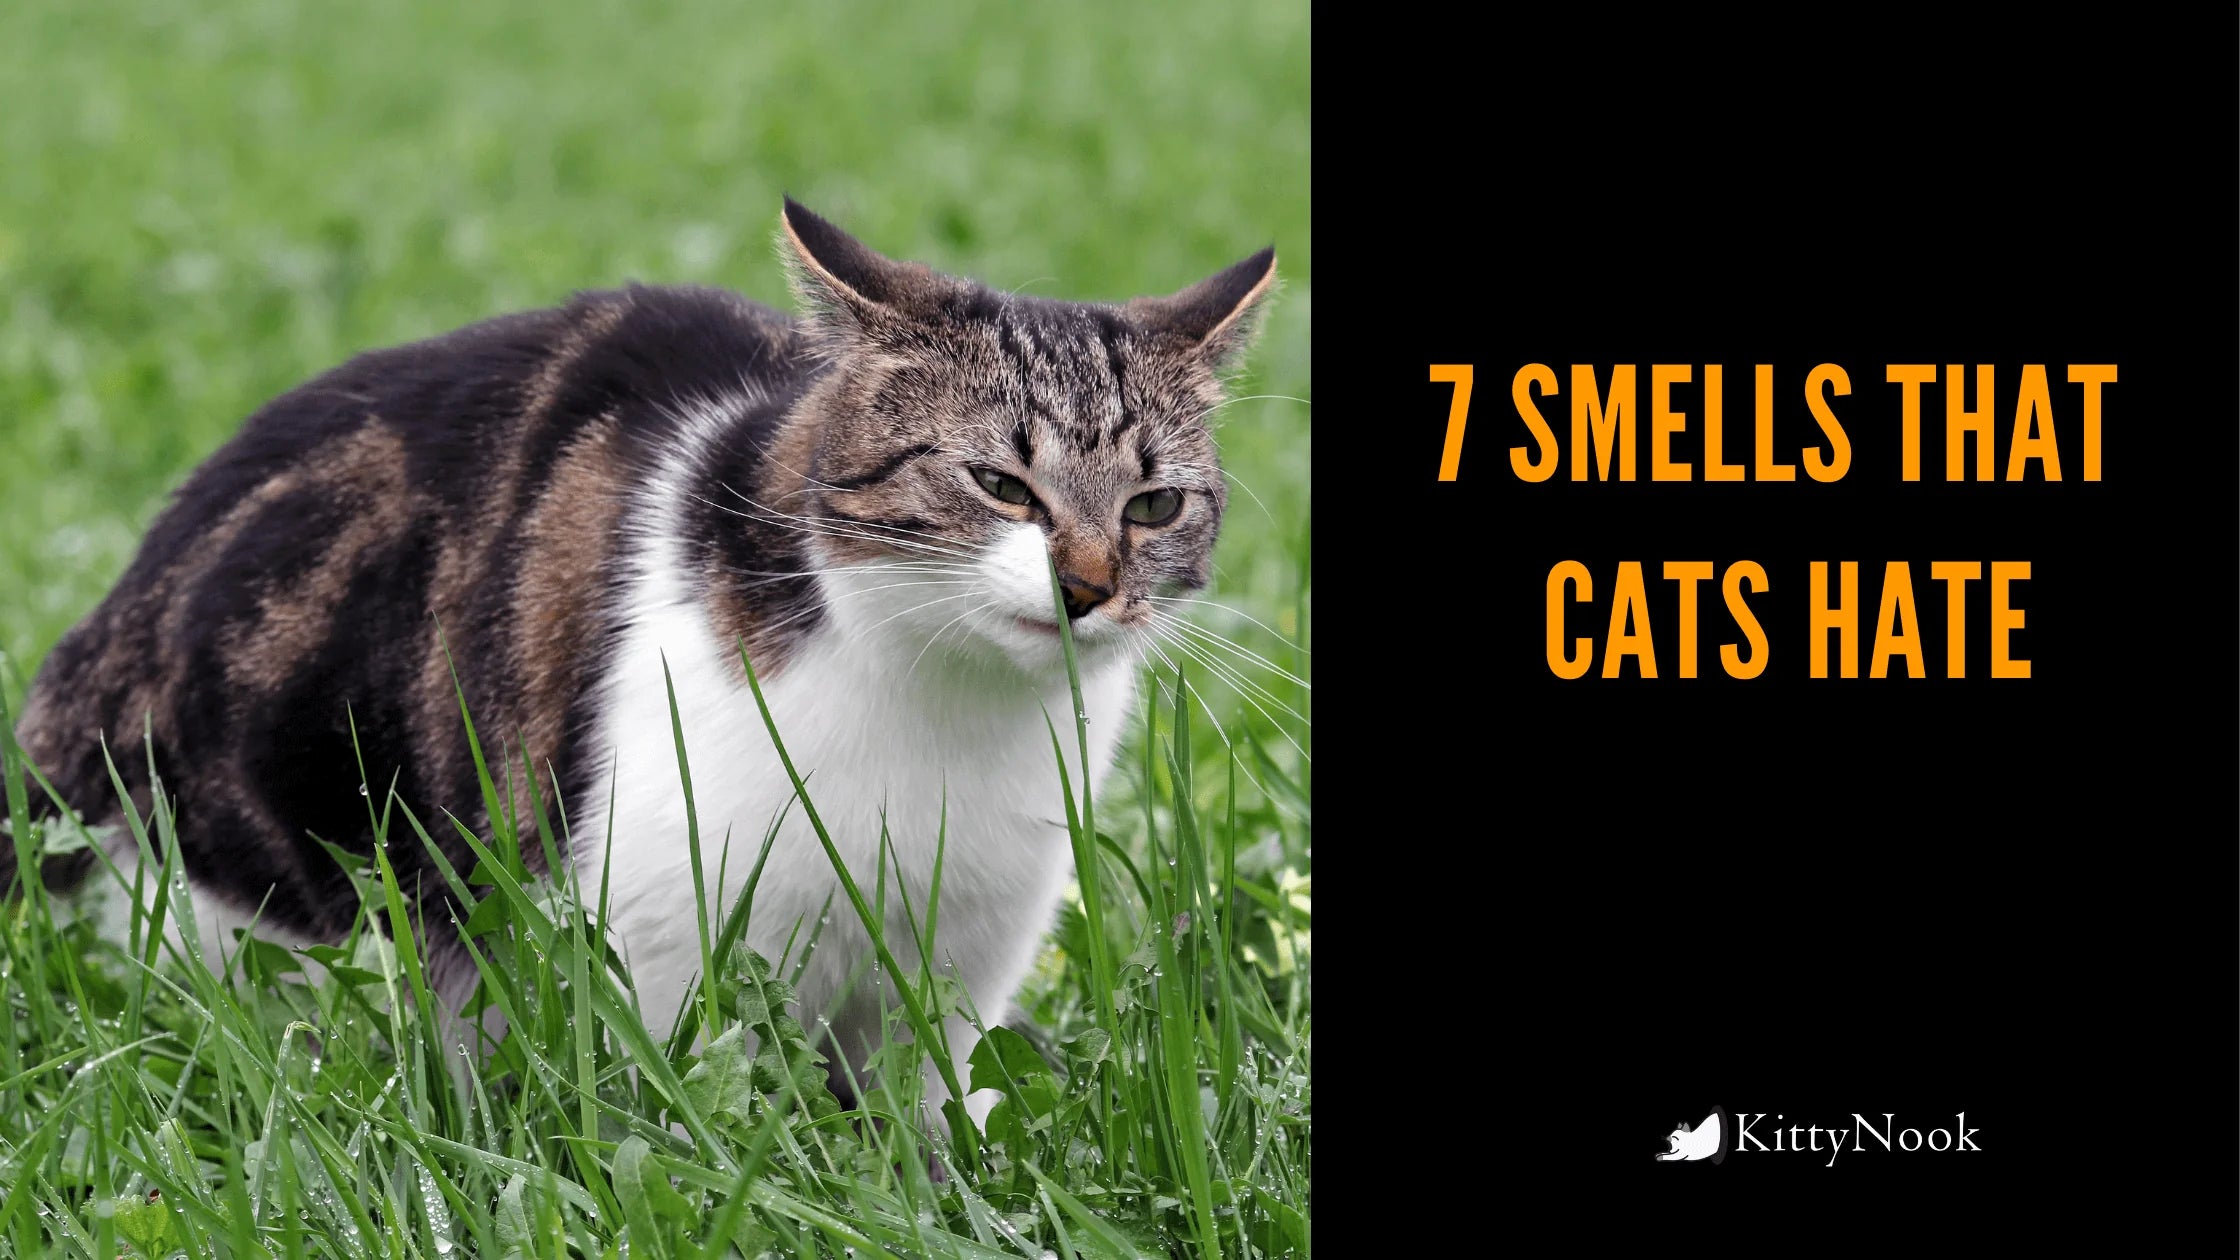 What Smells Do Cats Hate? 7 Items You Should Move Away From Your Cats - KittyNook Cat Company